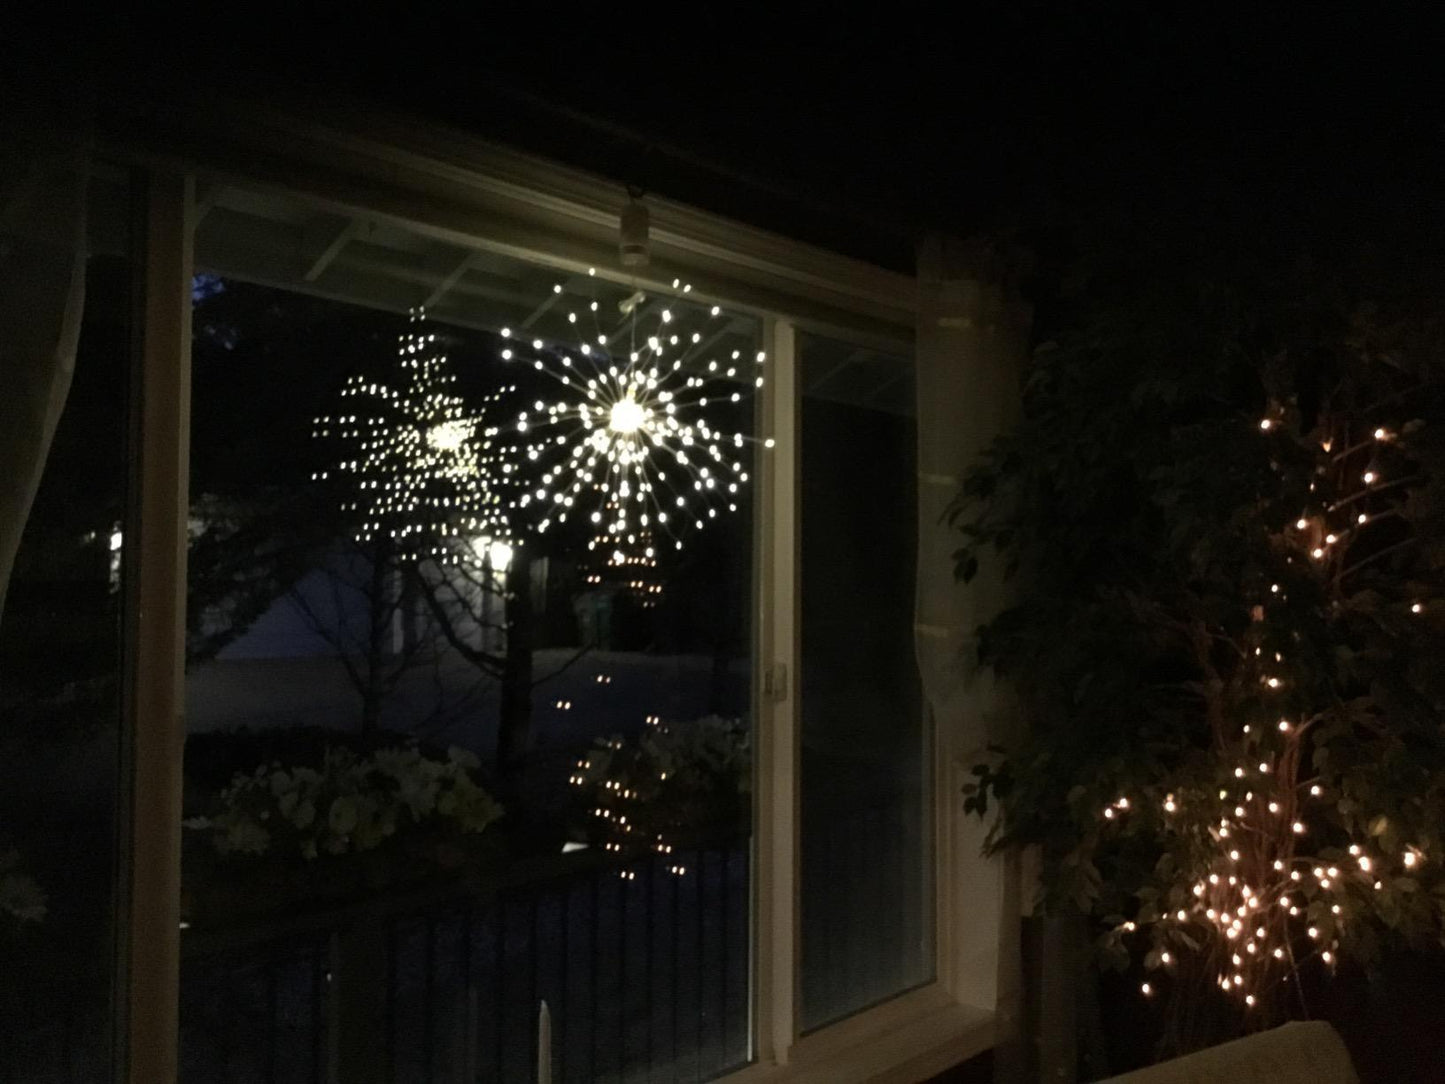 LED Copper Wire Firework Light Decorations, Twinkly Christmas Tree Lights - If you say i do